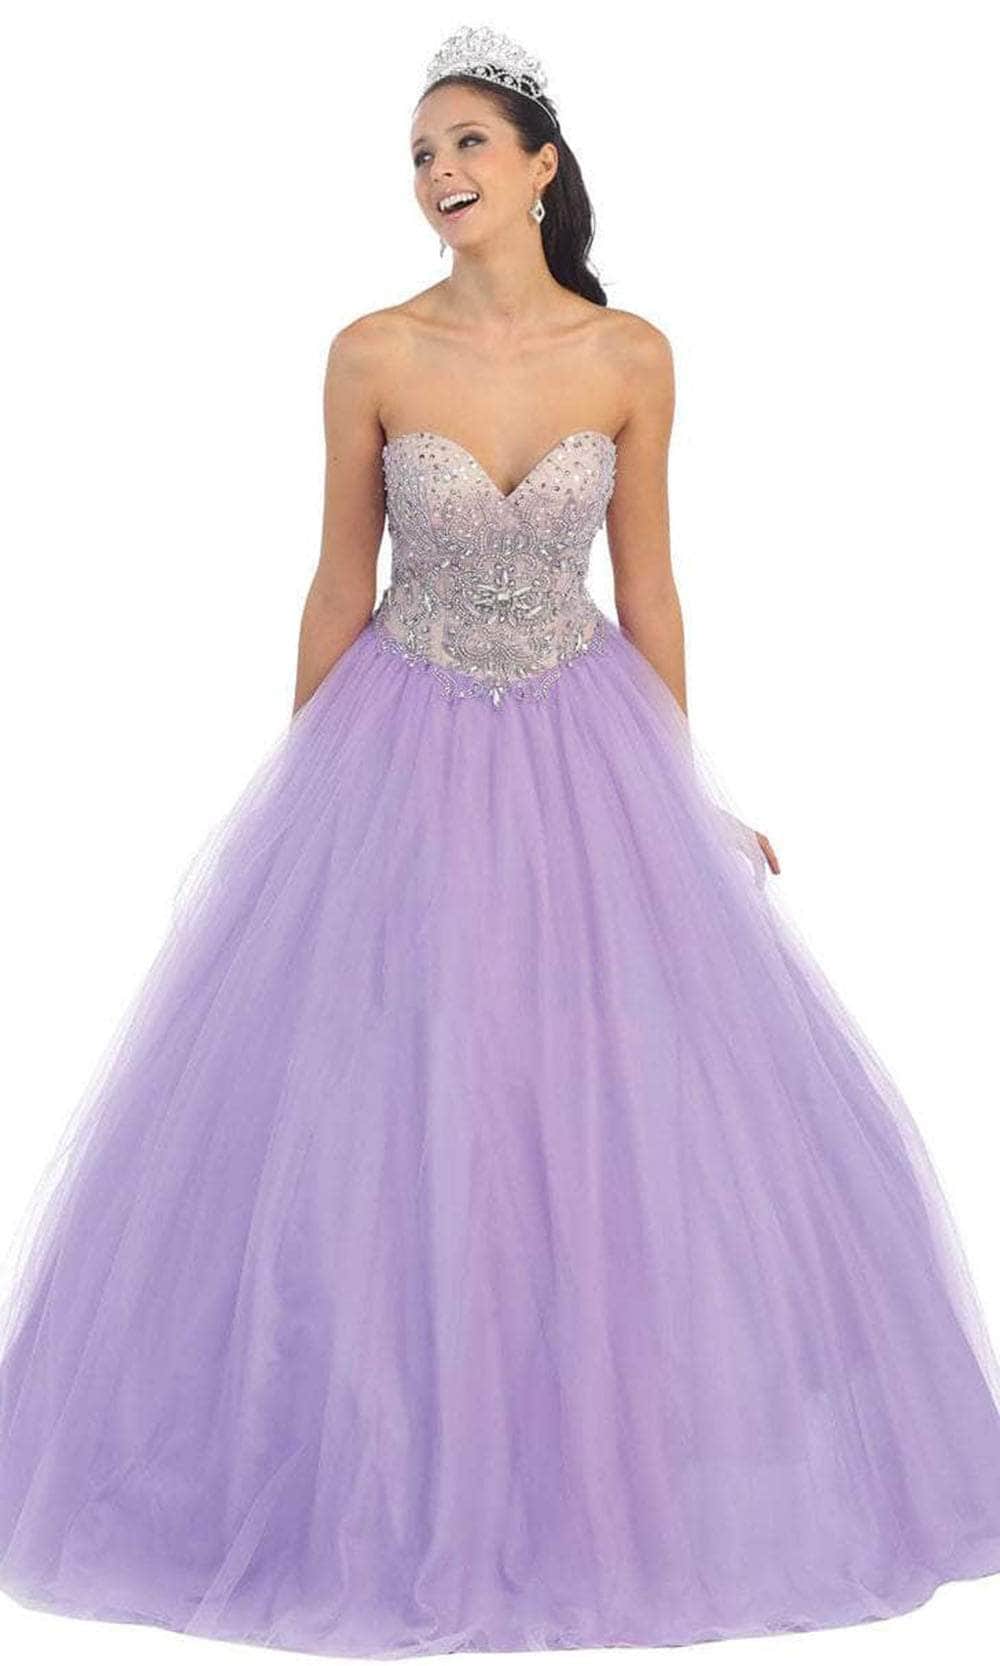 May Queen LK38 - Beaded Strapless Prom Ballgown Ball Gowns 4 / Purple